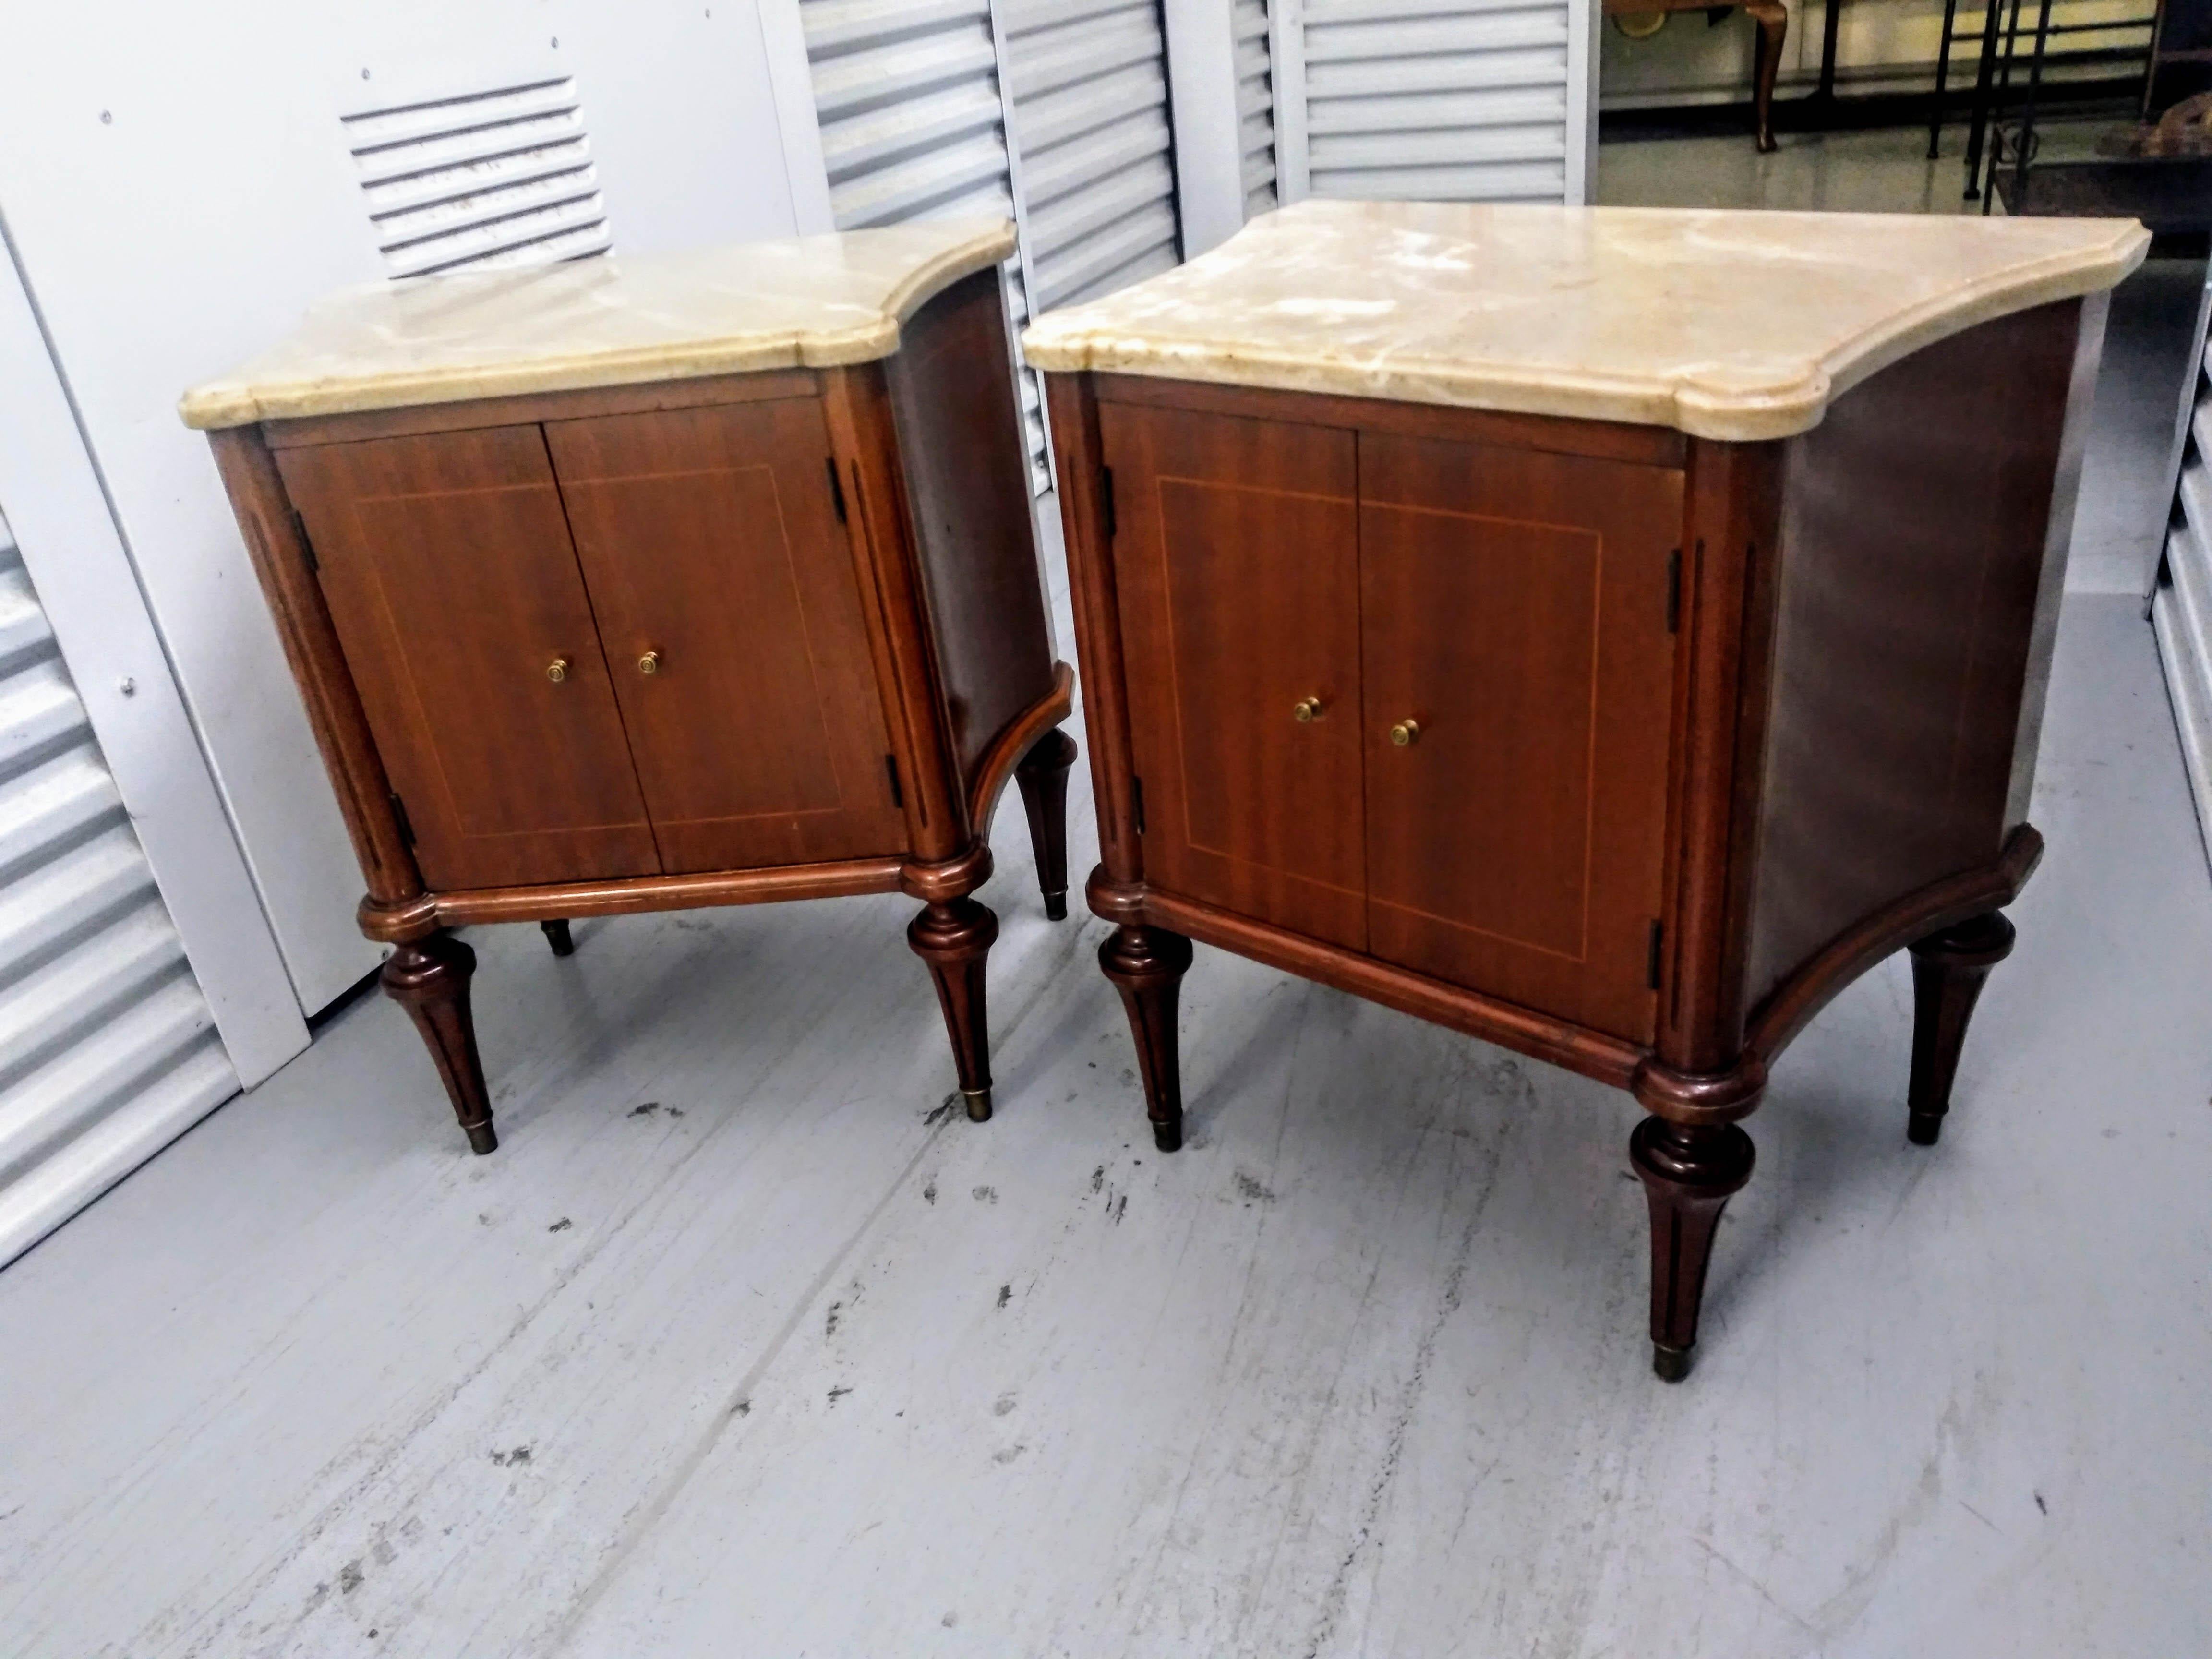 Pair Louis XVI Directoire style marble top commode nightstands

Elegant nightstands from Spain in ribbon mahogany on four tapered legs. Featuring double doors with a single drawer. The night stands have capped feet on all four legs and bronze